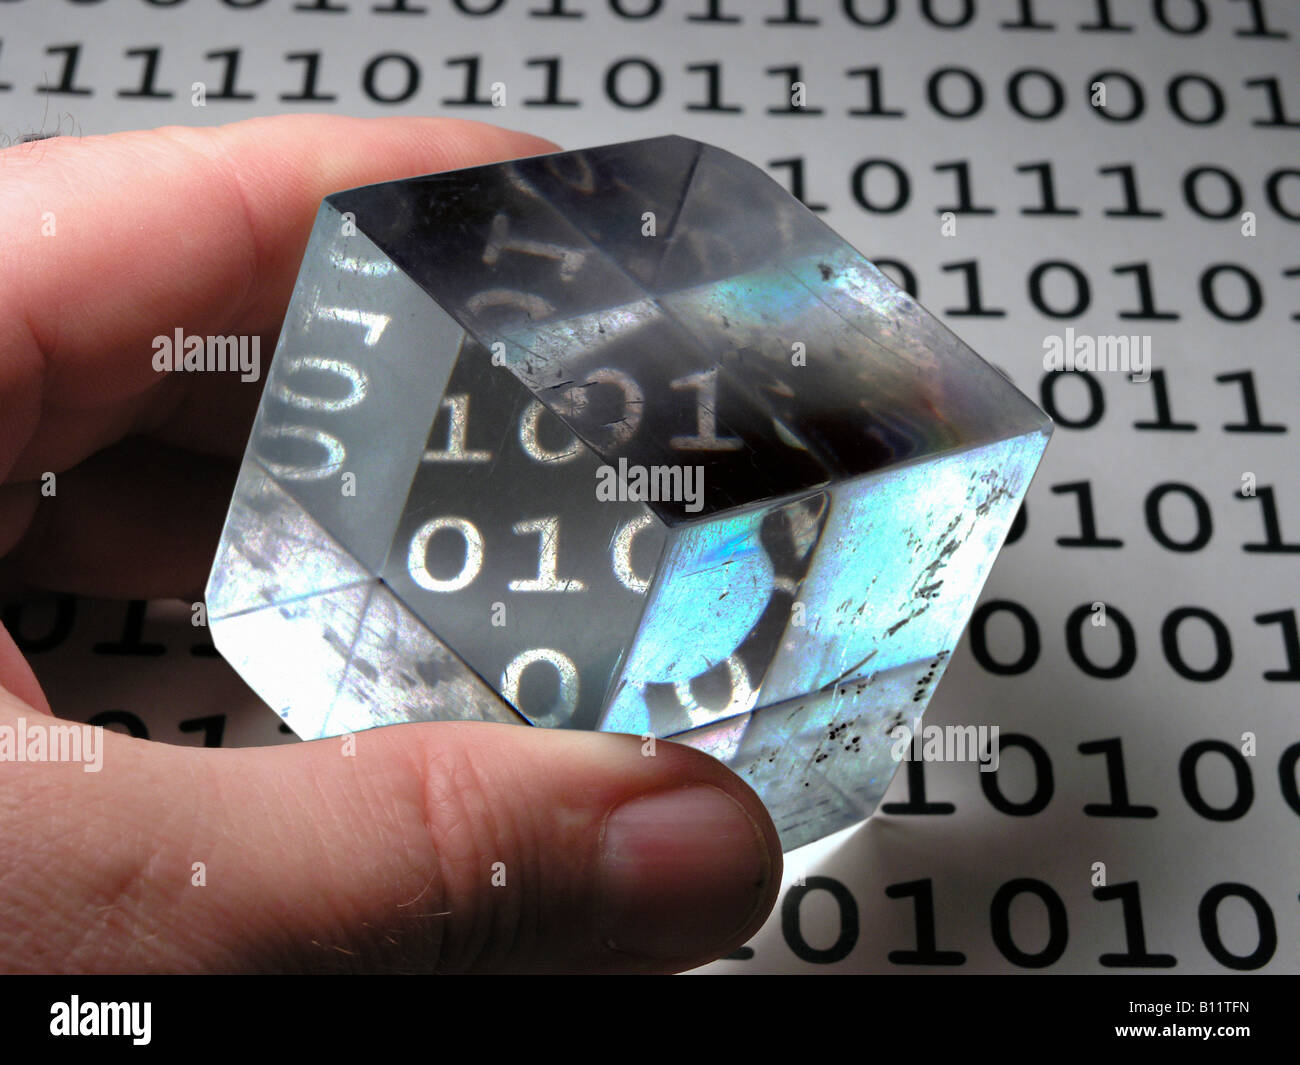 Digital gackground showing binary numbers changed in a plastic cube Stock Photo